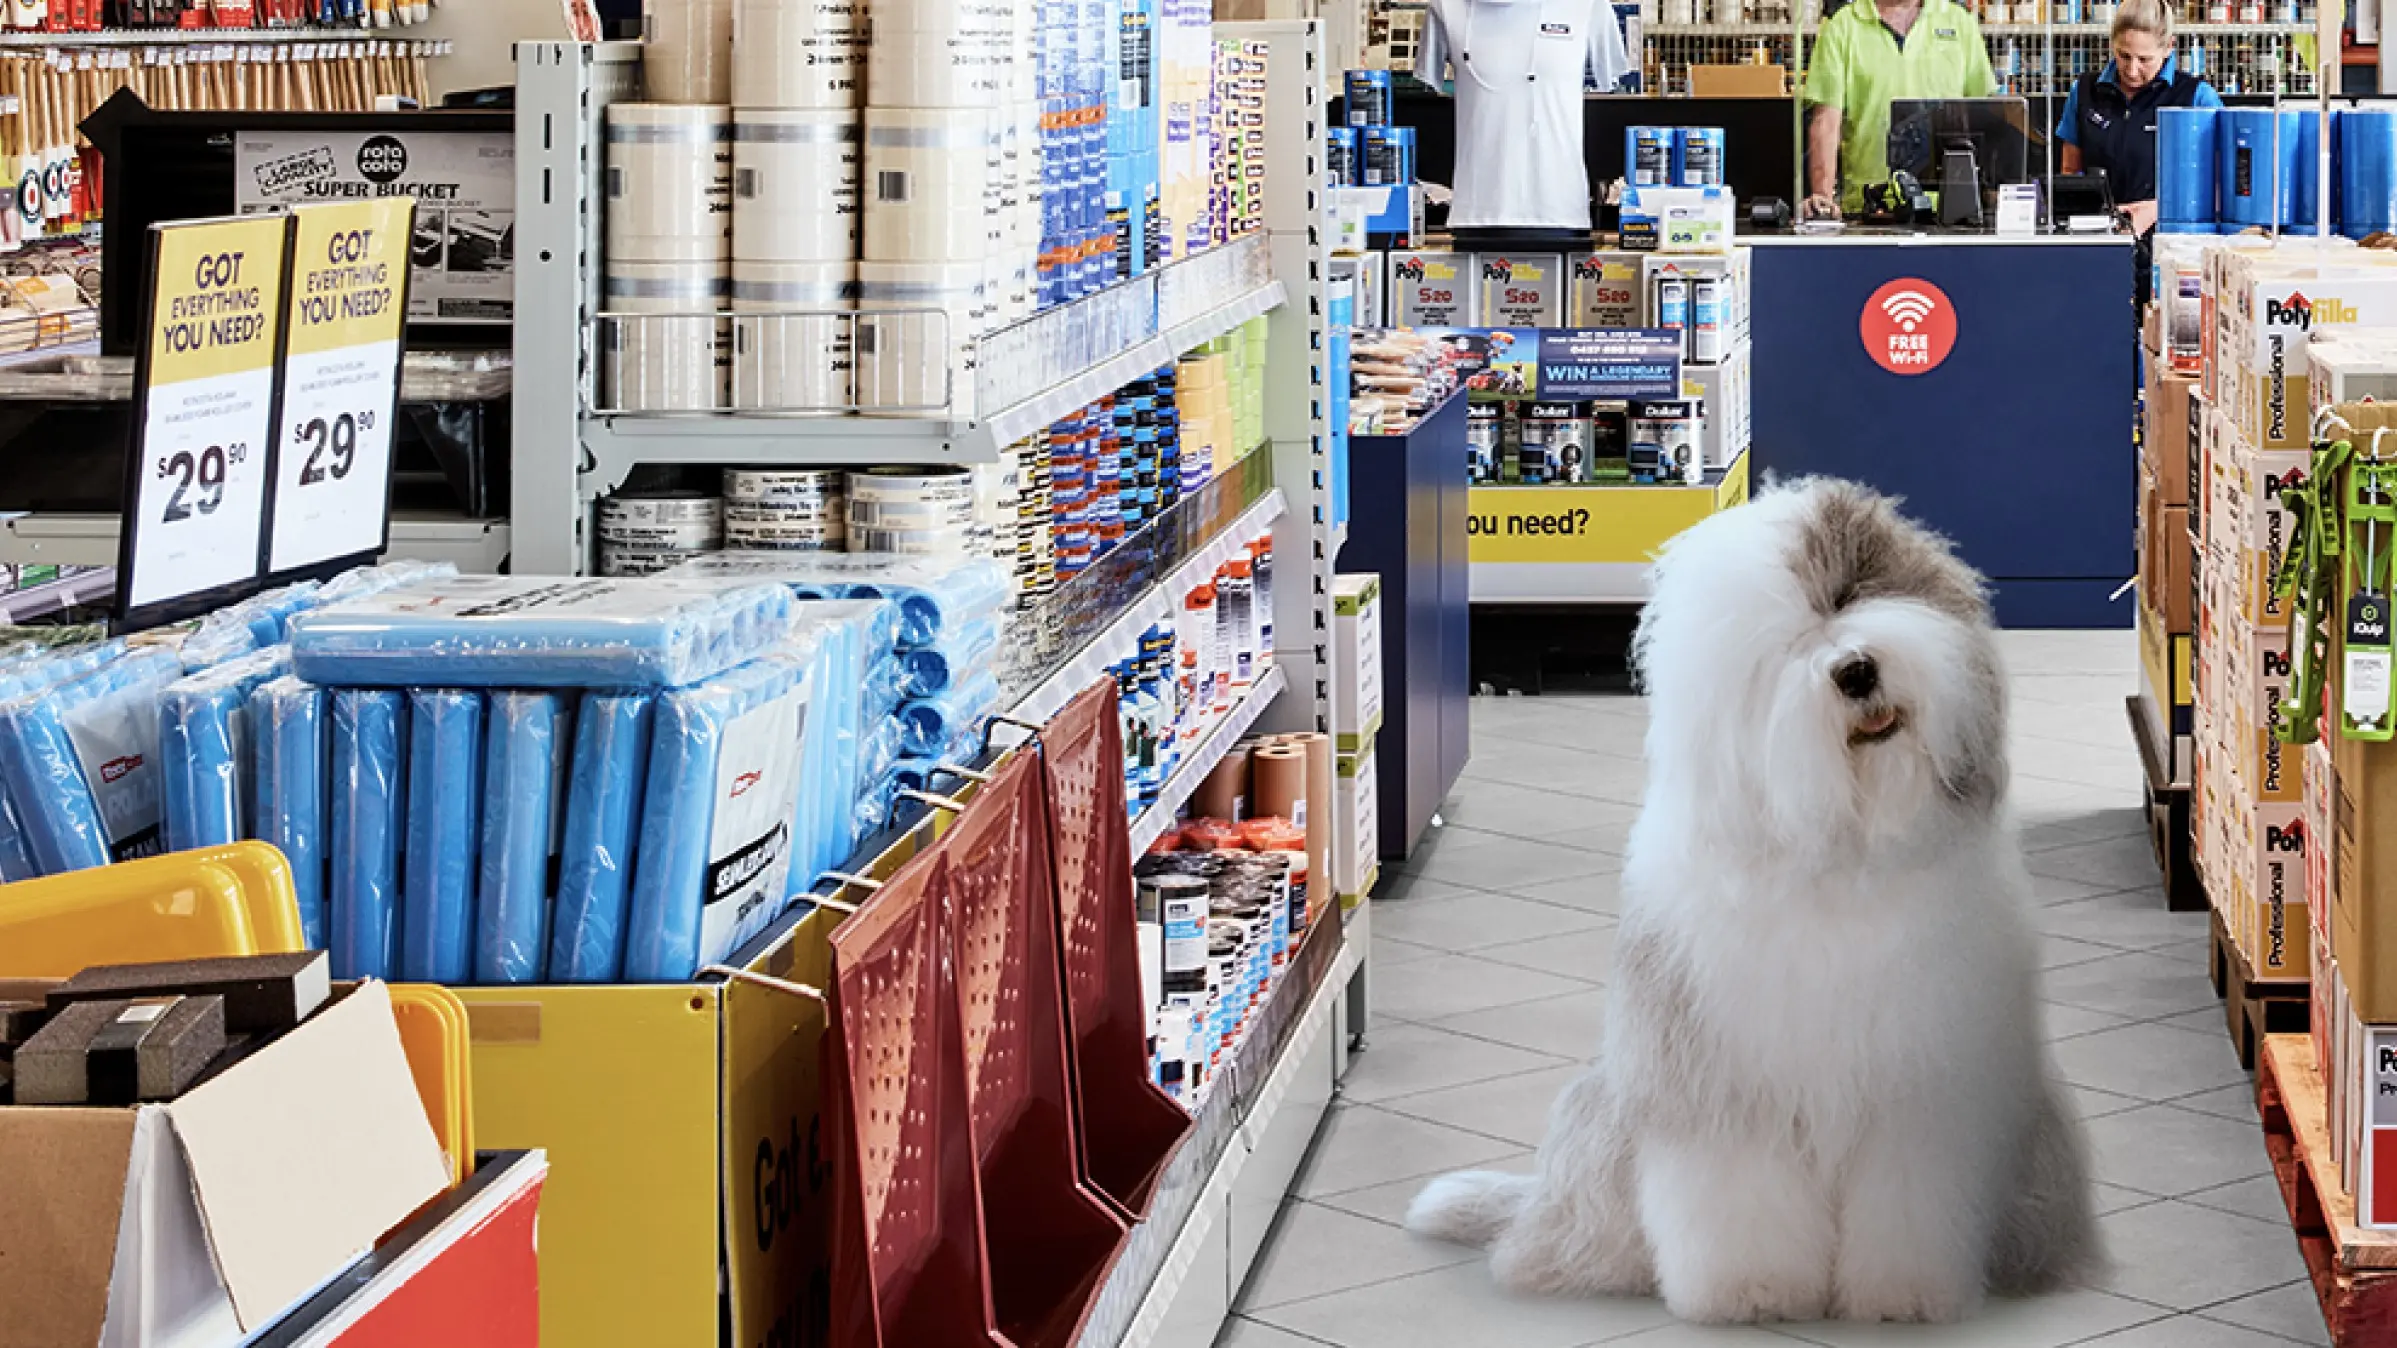 Dulux dog in aisle of store.